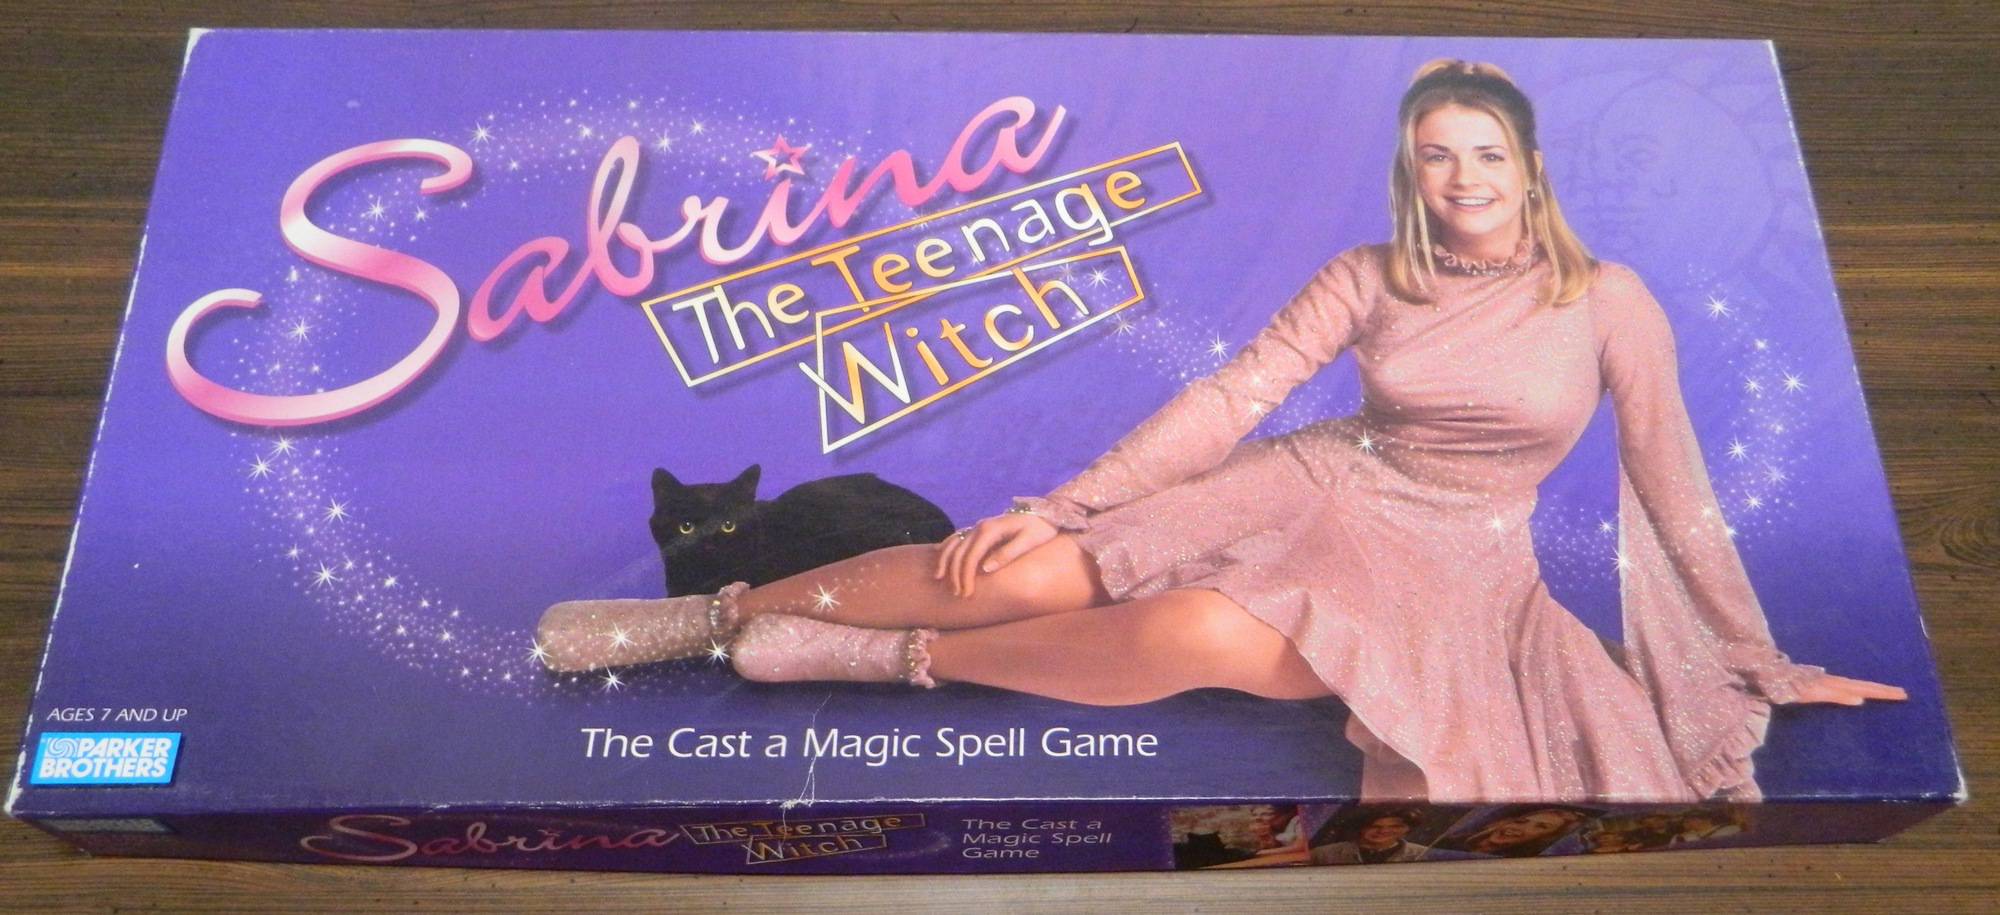 Sabrina The Teenage Witch Game Board Game Review and Rules